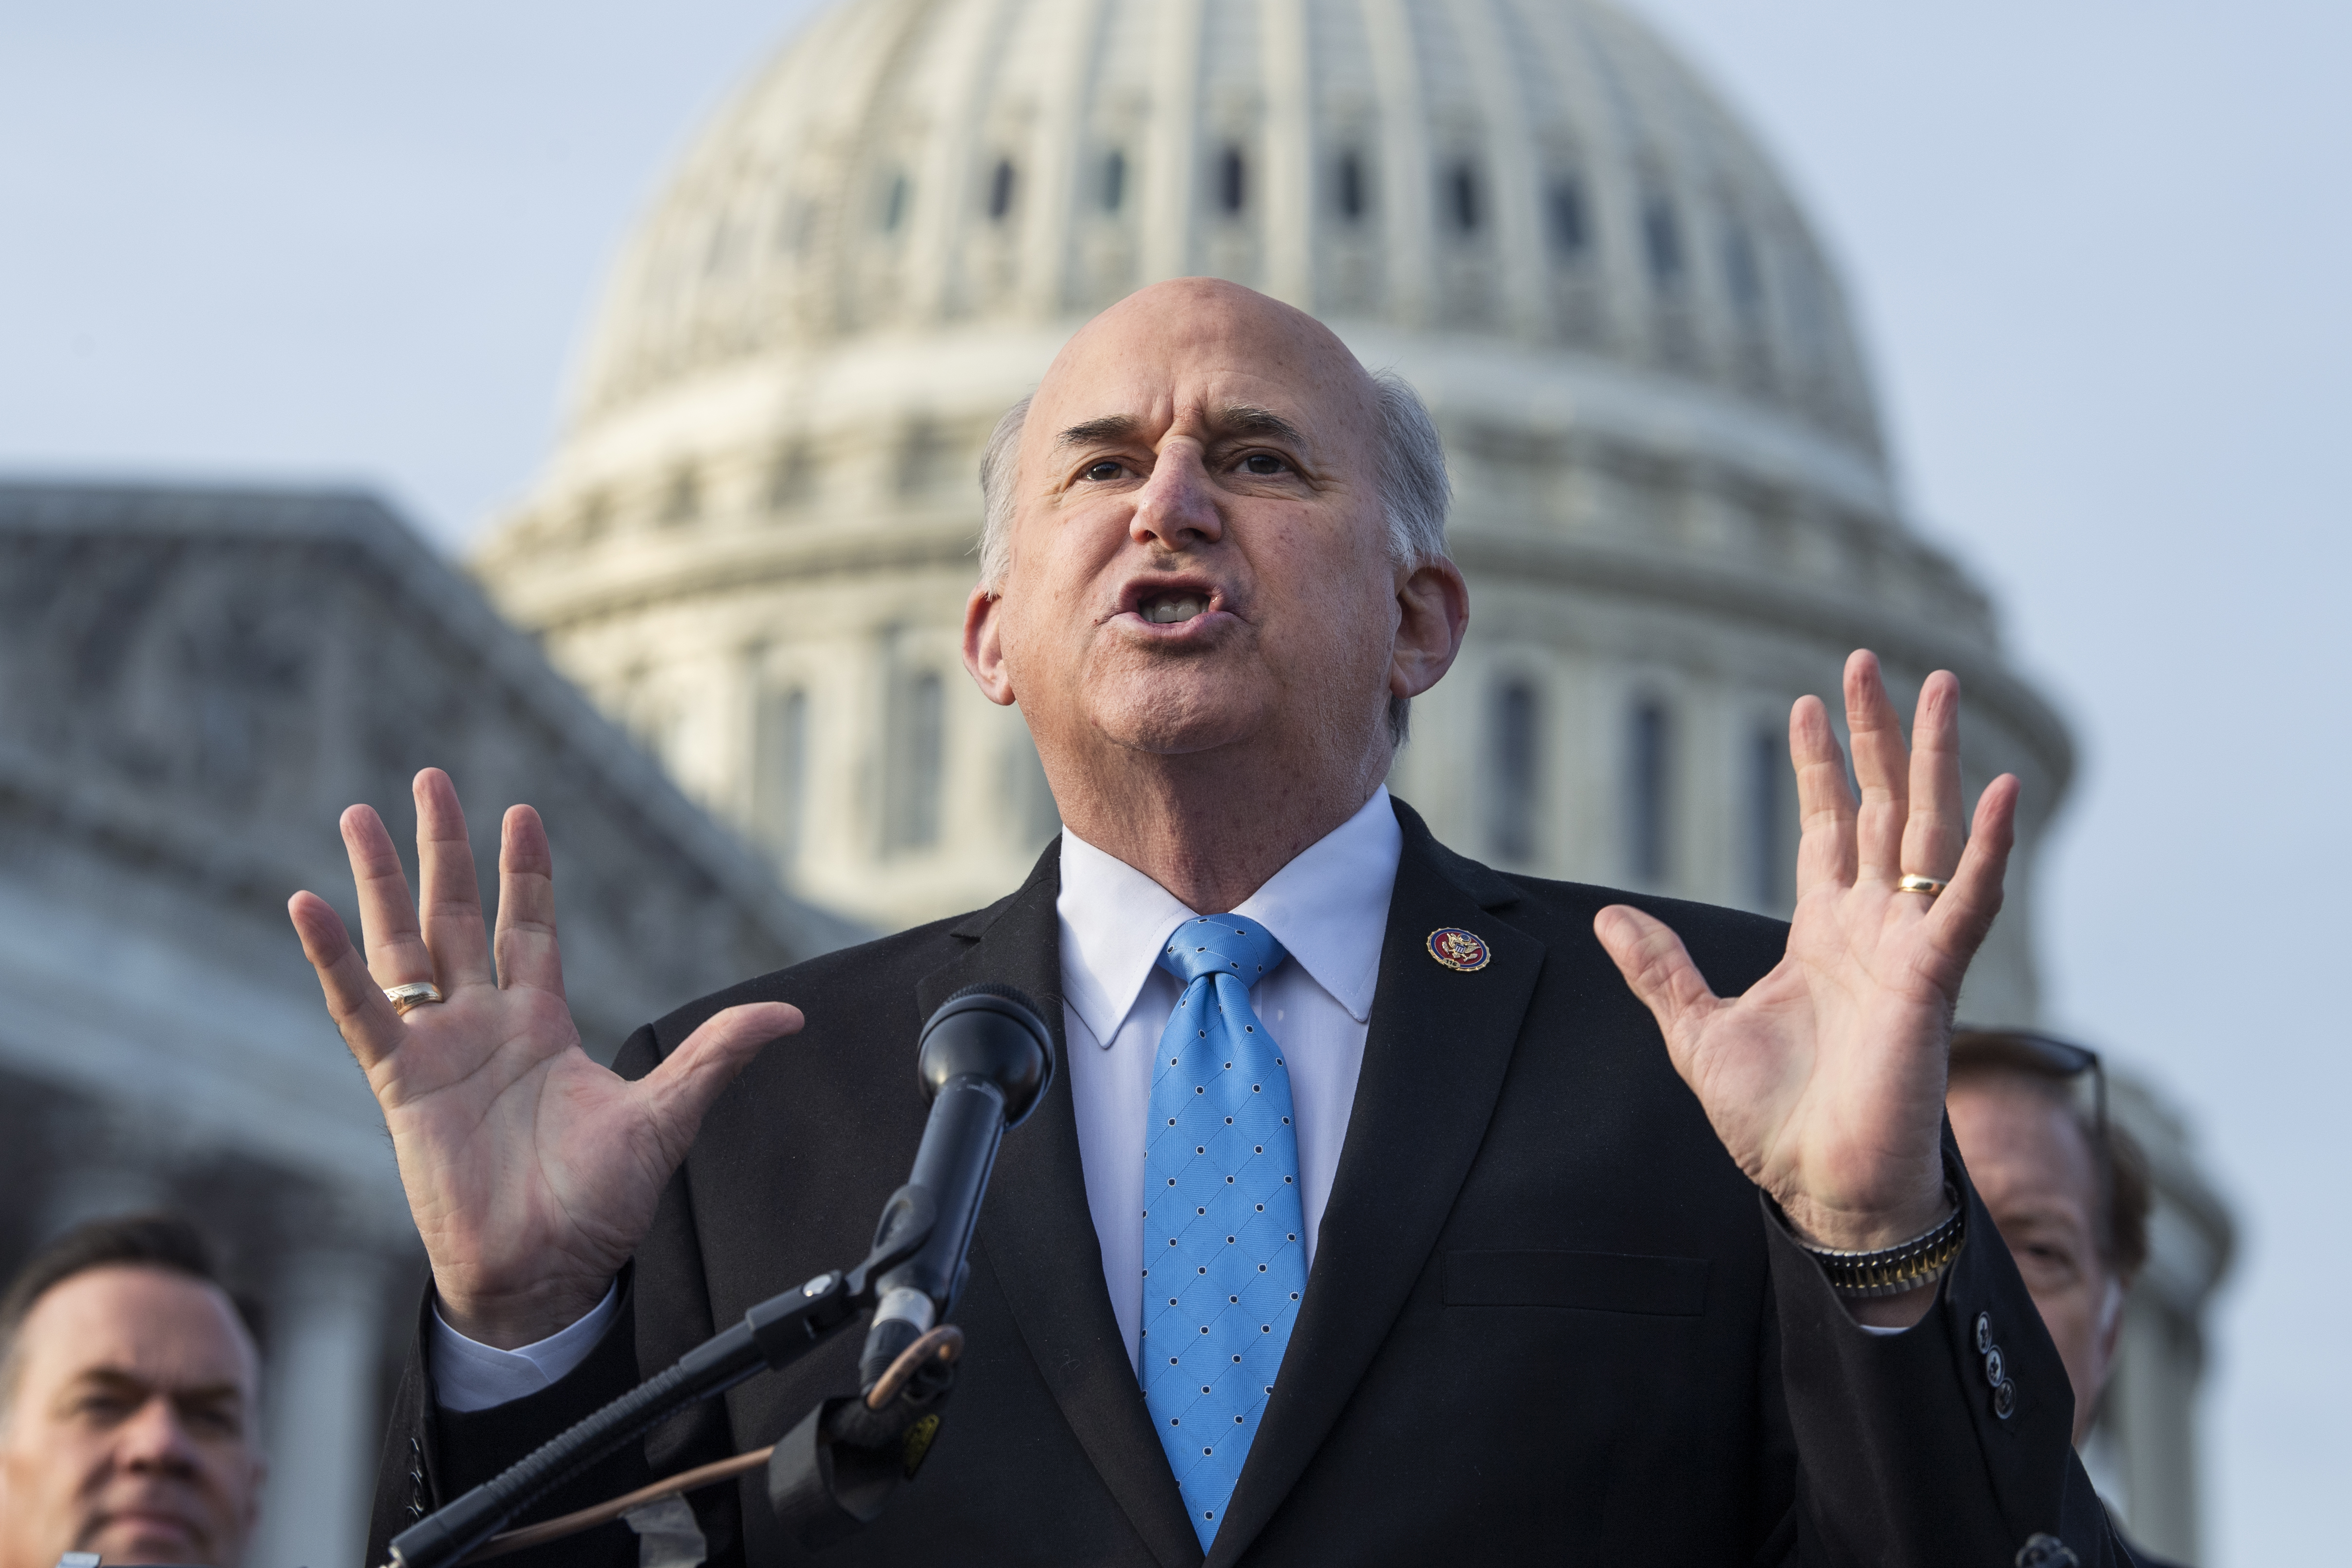 Gohmert, in a dark suit and blue tie, has his head — bald on top, with white hair on the sides — tilted back as he speaks, and framed by the white dome of the Capitol.